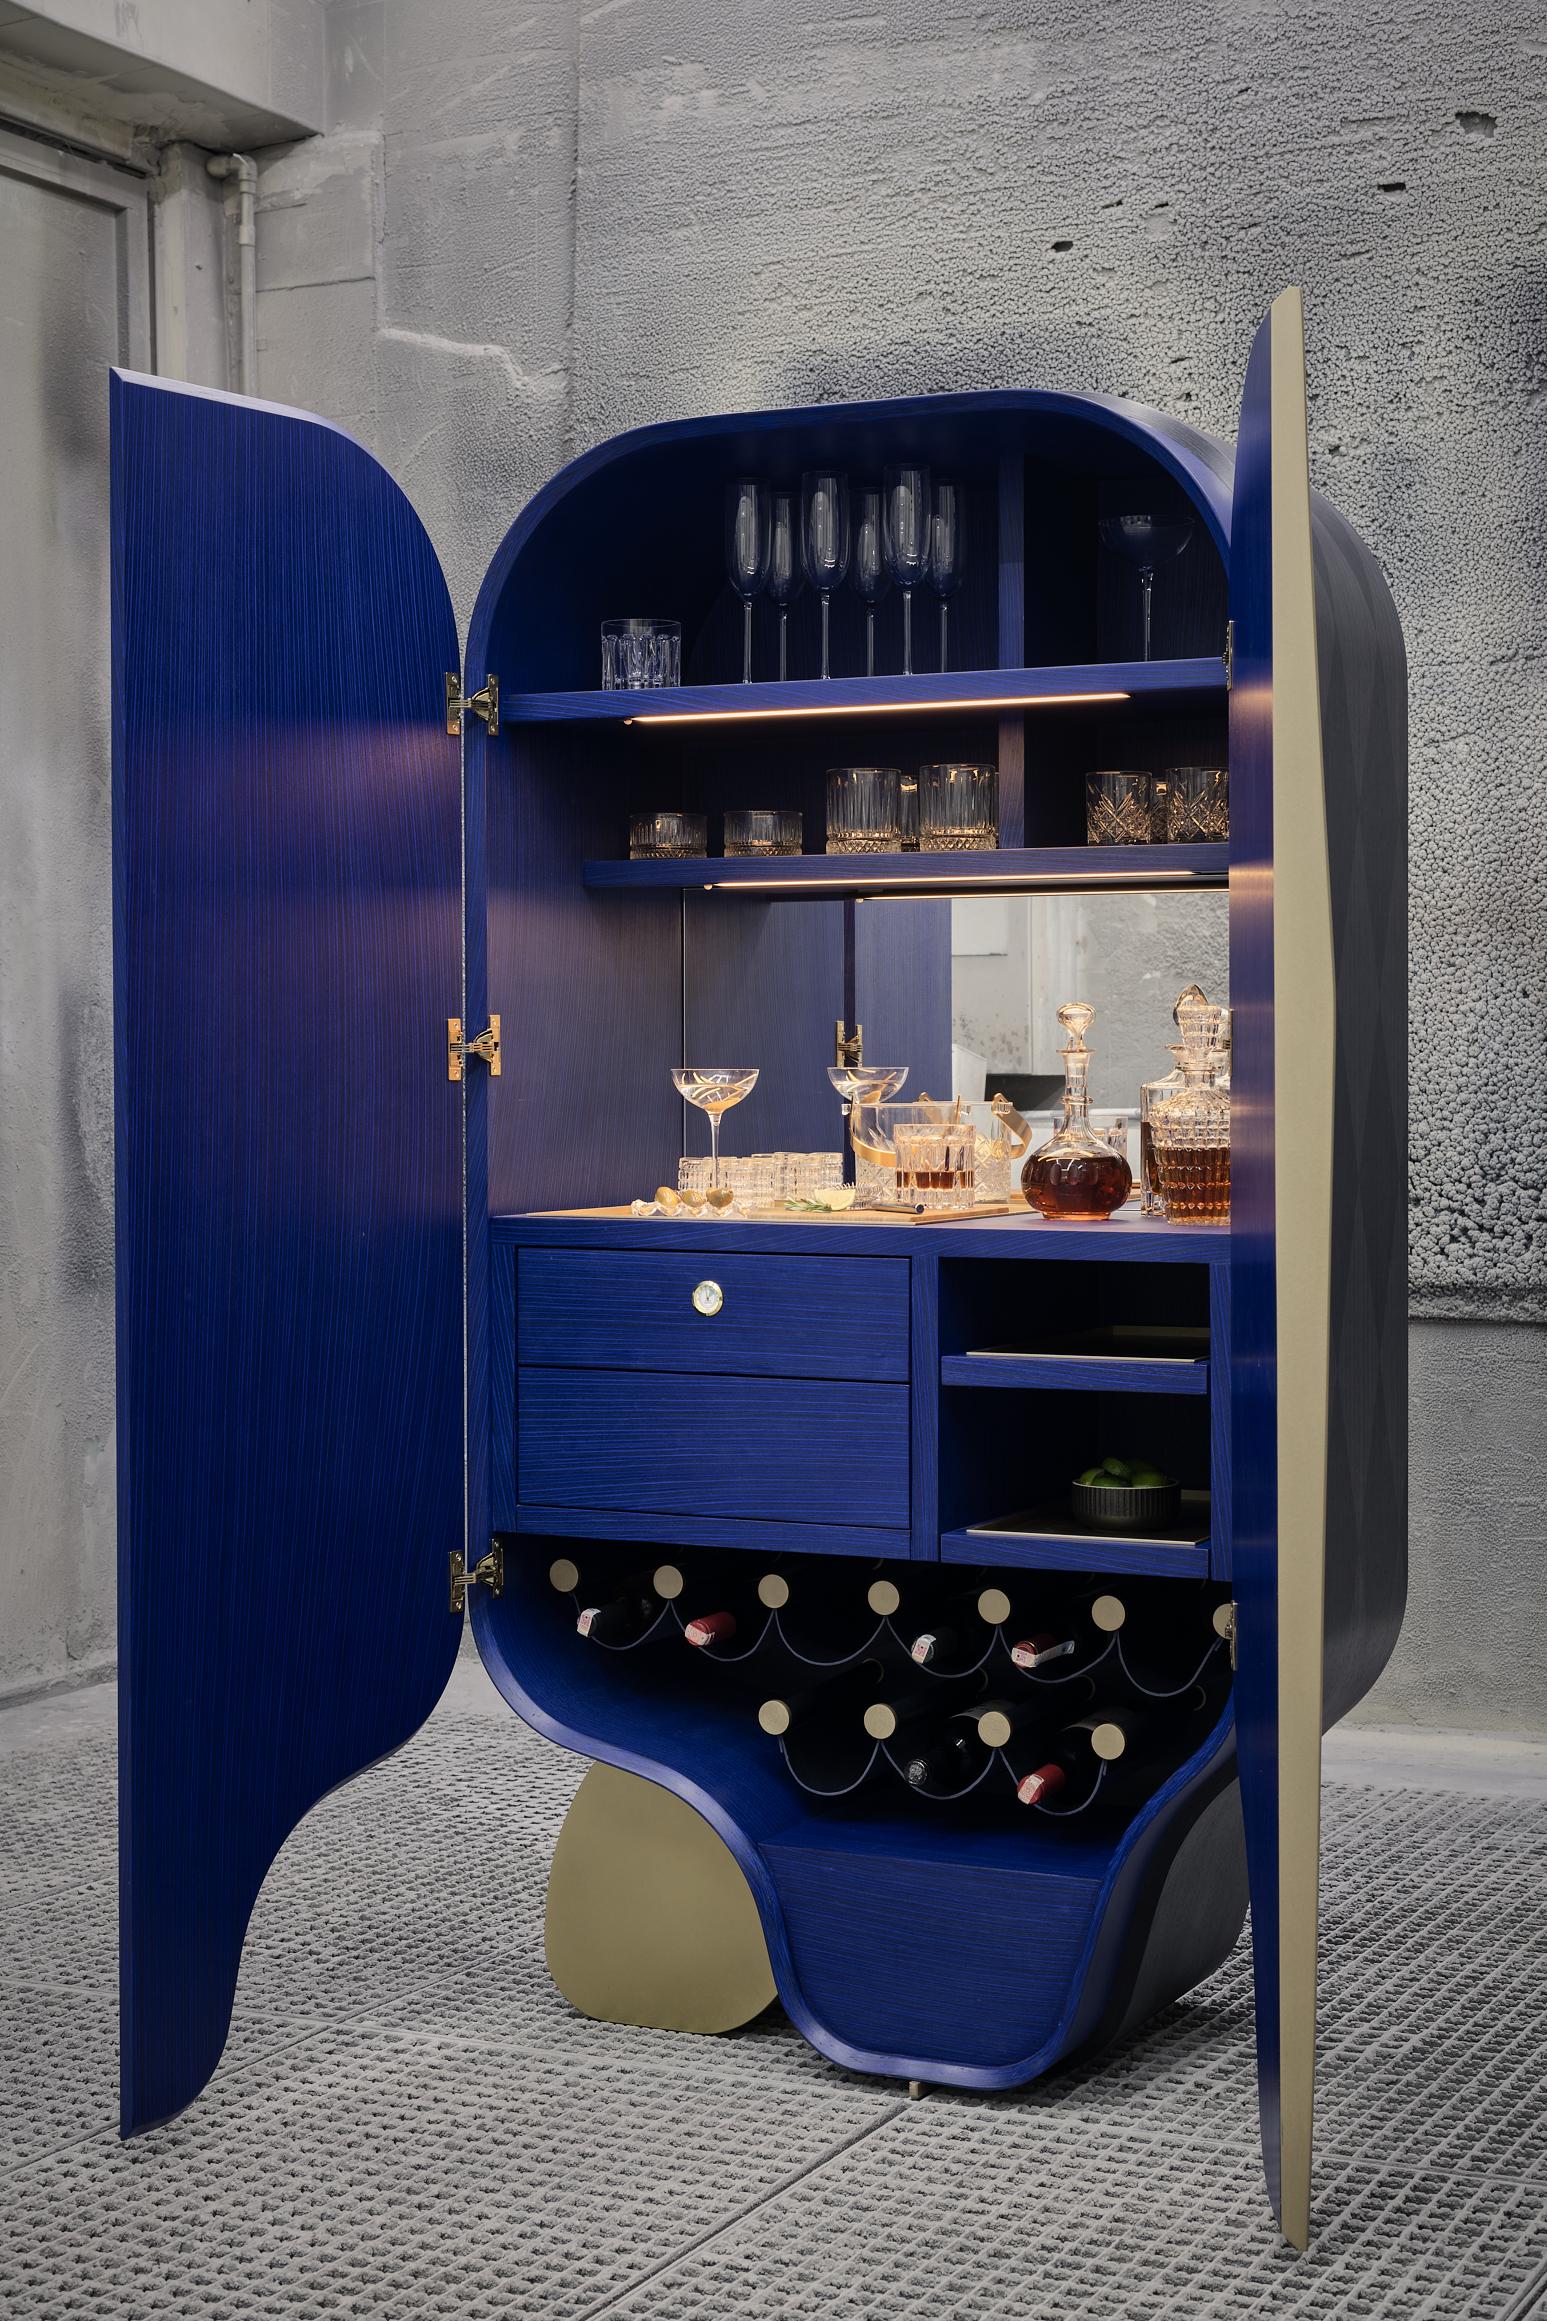 Cabinet 001 is a unique piece of furniture that transcends time and style. Inspired by the concept of time travel, this sculptural cabinet blends design elements from different eras to create a statement piece that stands out in any space. With a